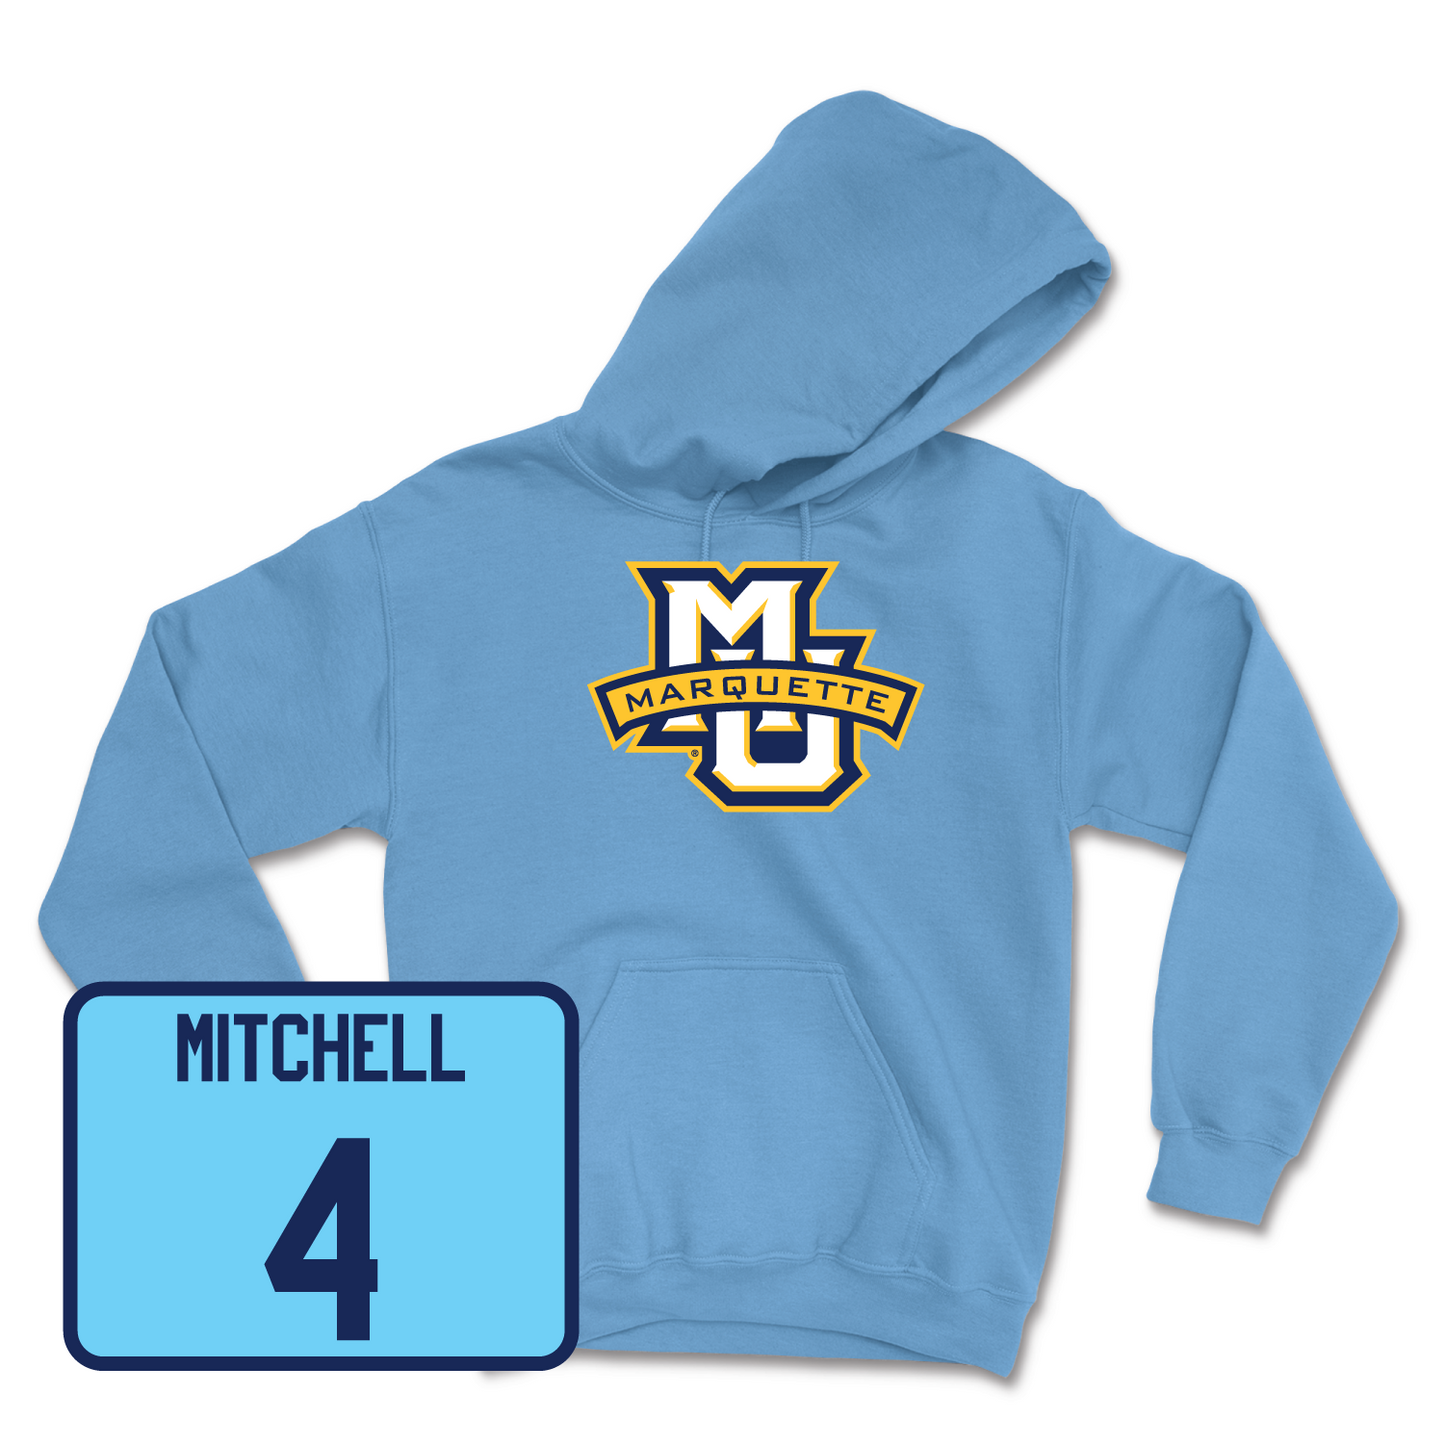 Championship Blue Men's Basketball Marquette Hoodie 2 2X-Large / Stevie Mitchell | #4